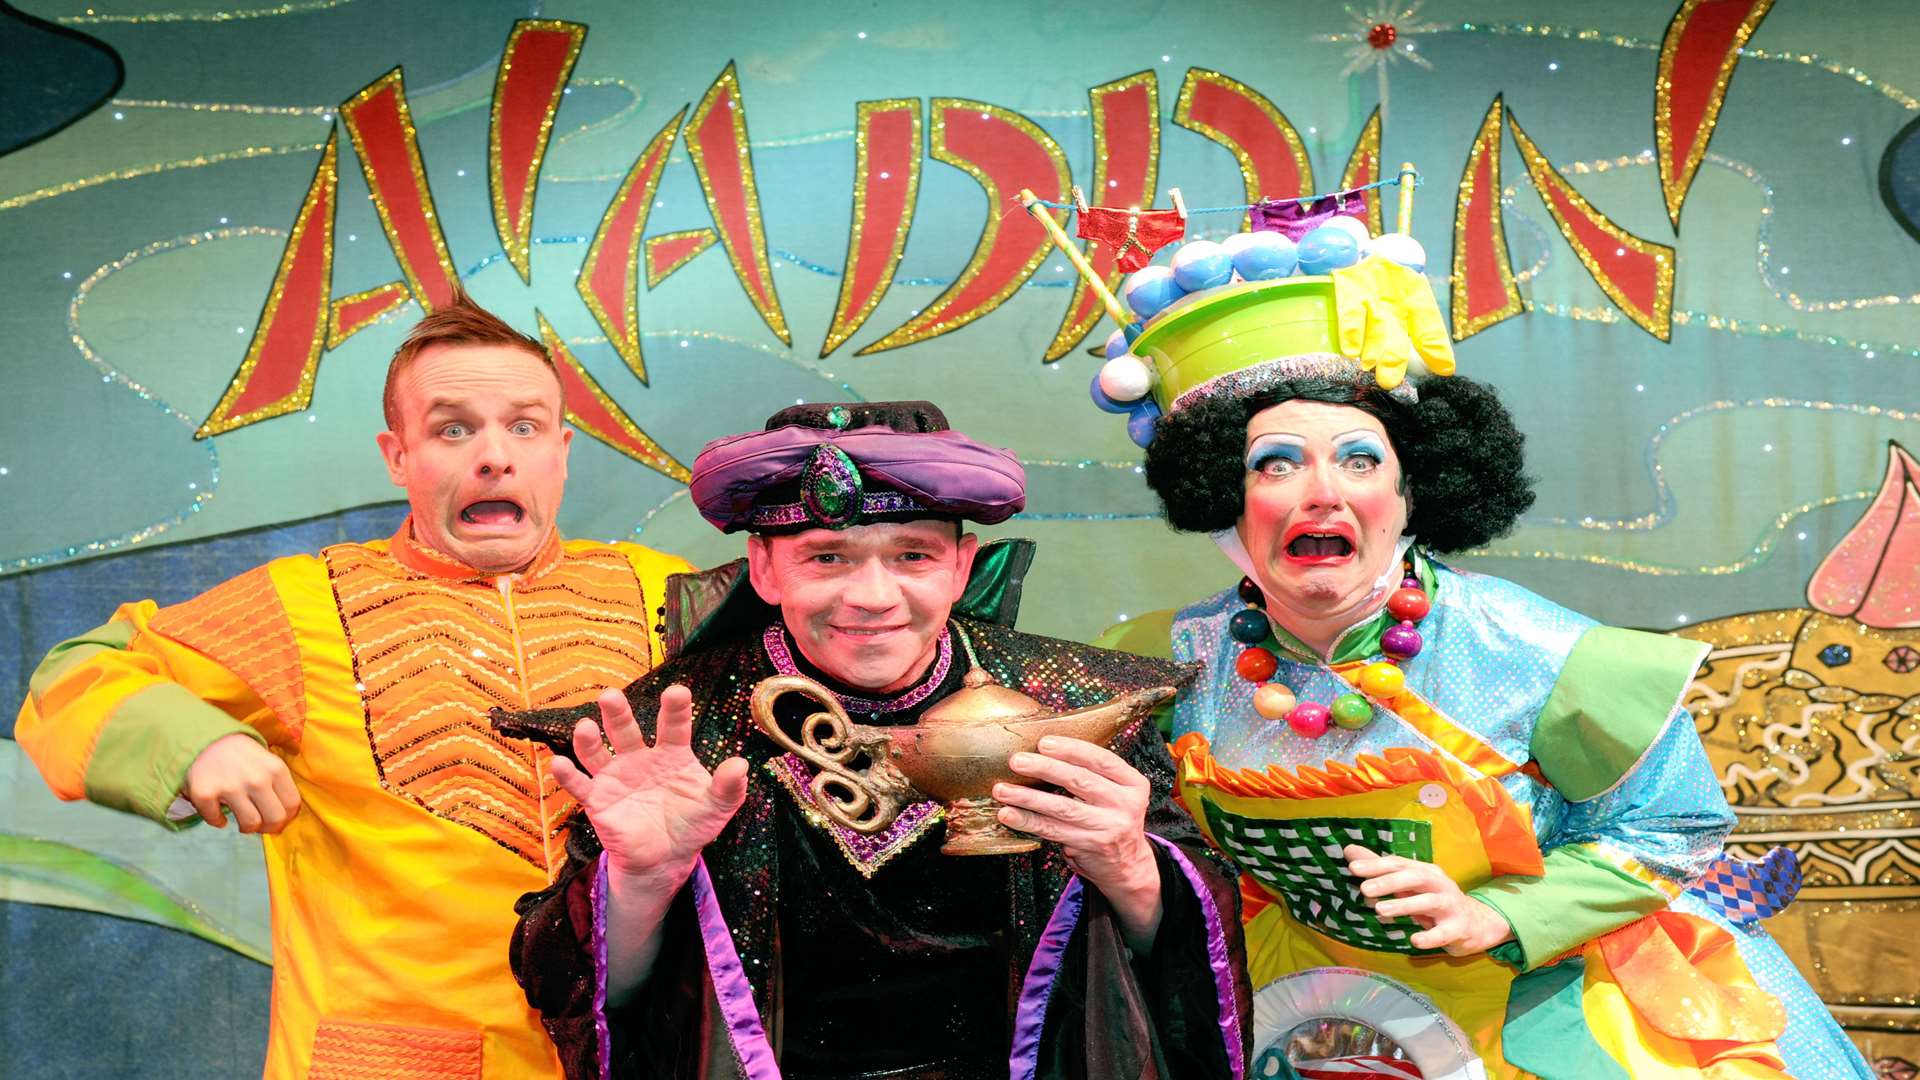 David Dobson, Todd Carty, Mark Siney dressed up and ready for the panto.